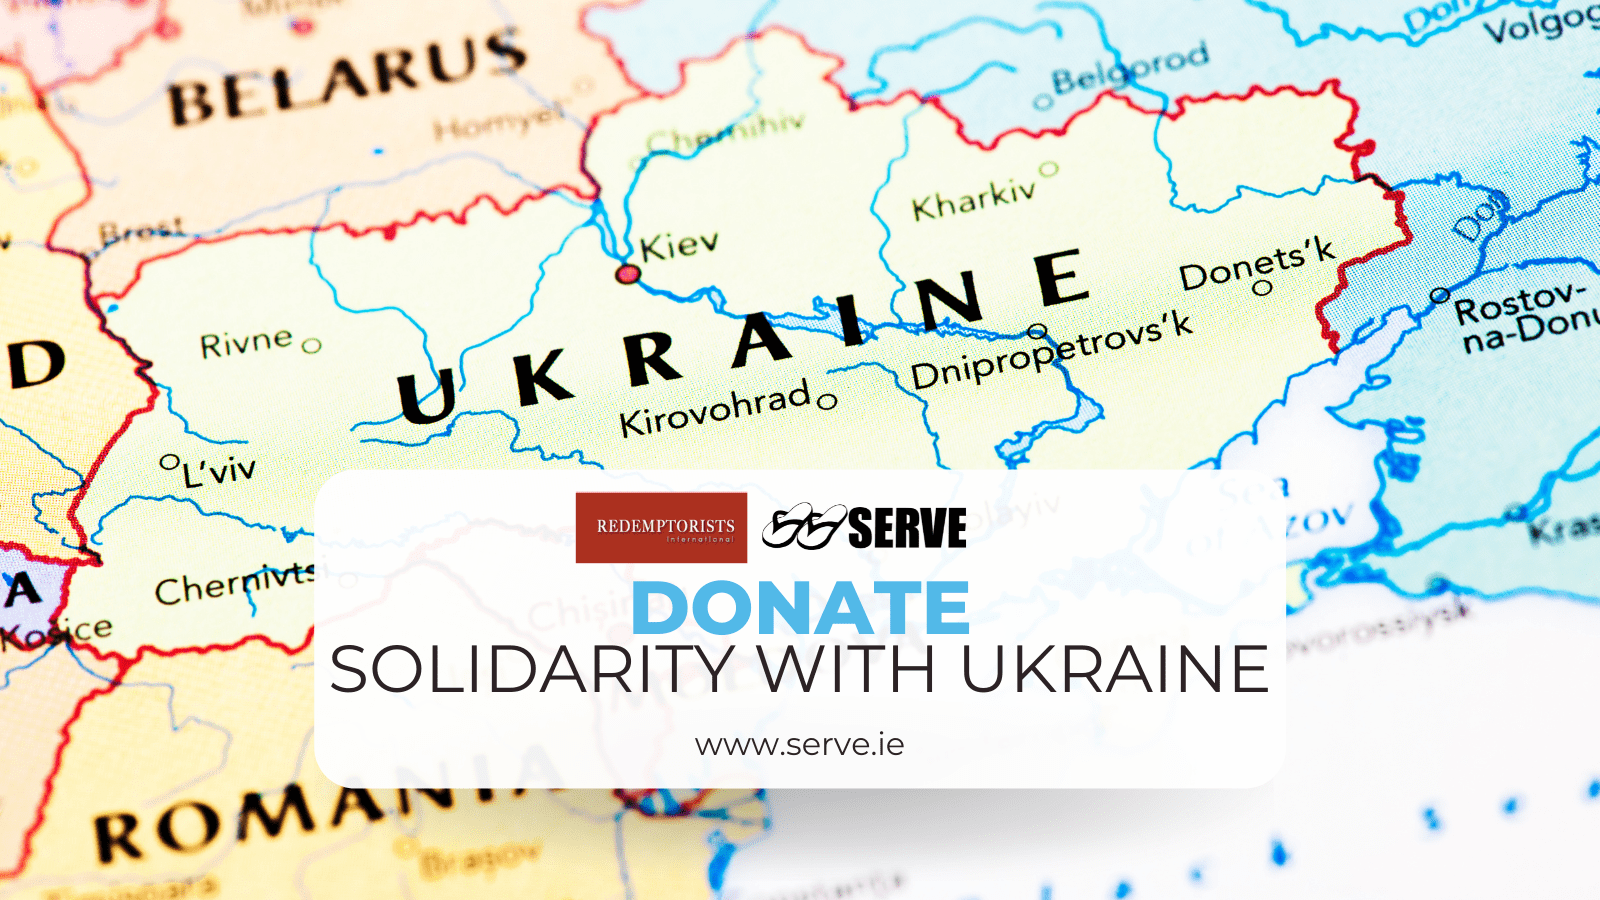 Donate to support SERVE’s partners, the Redemptorists in the Ukraine who have opened their houses and churches as sanctuaries for displaced families.